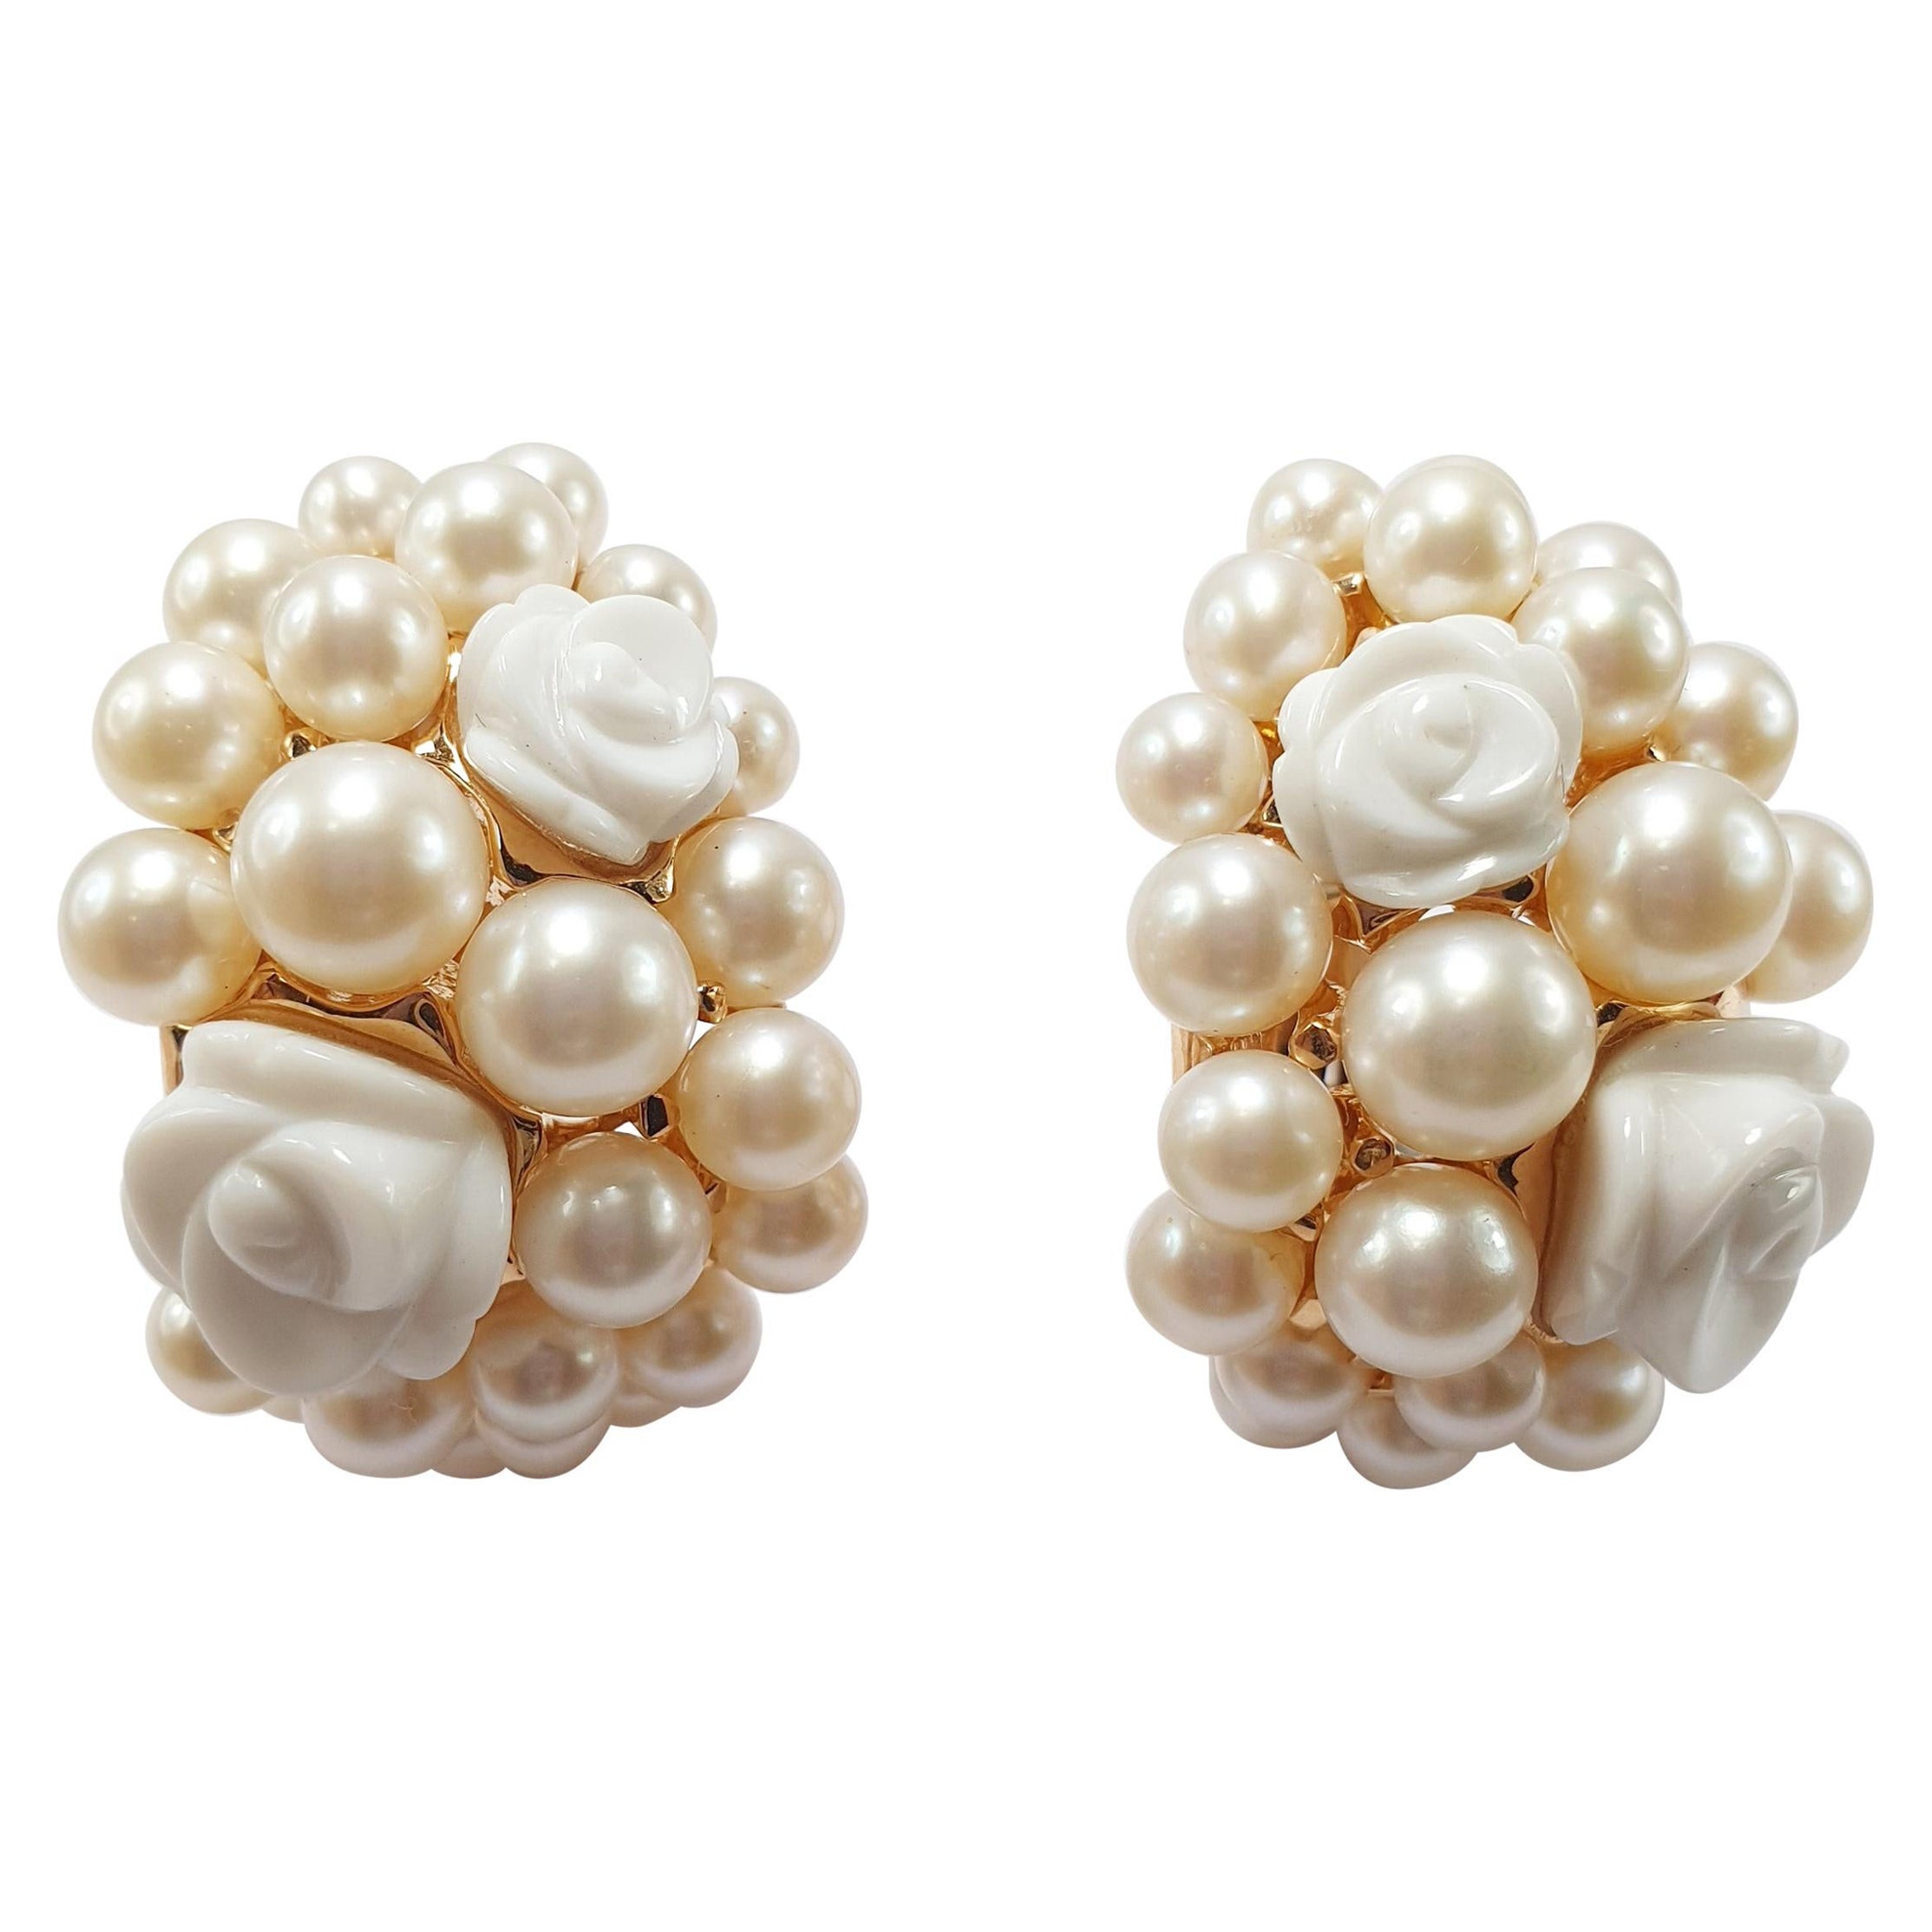 Mimi Milano 18 Karat Rose Gold Earrings with Agate Flowers and Pearls For Sale